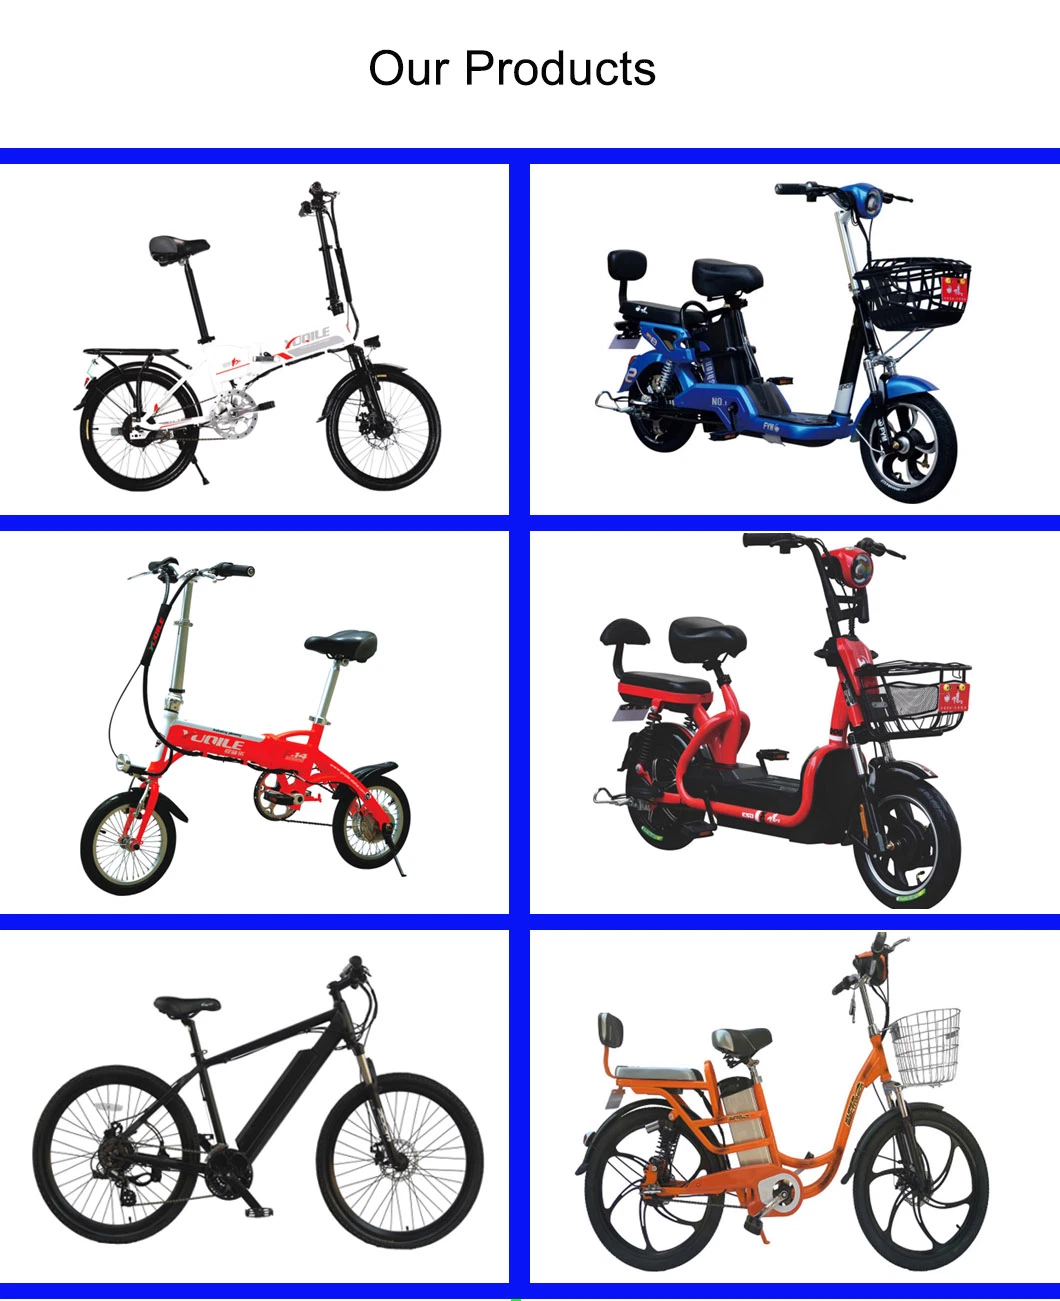 Newest Model Cheap Price 36V 350W 26inch 21 Speed Rear Motor Torque Mountain Electric Bicycle